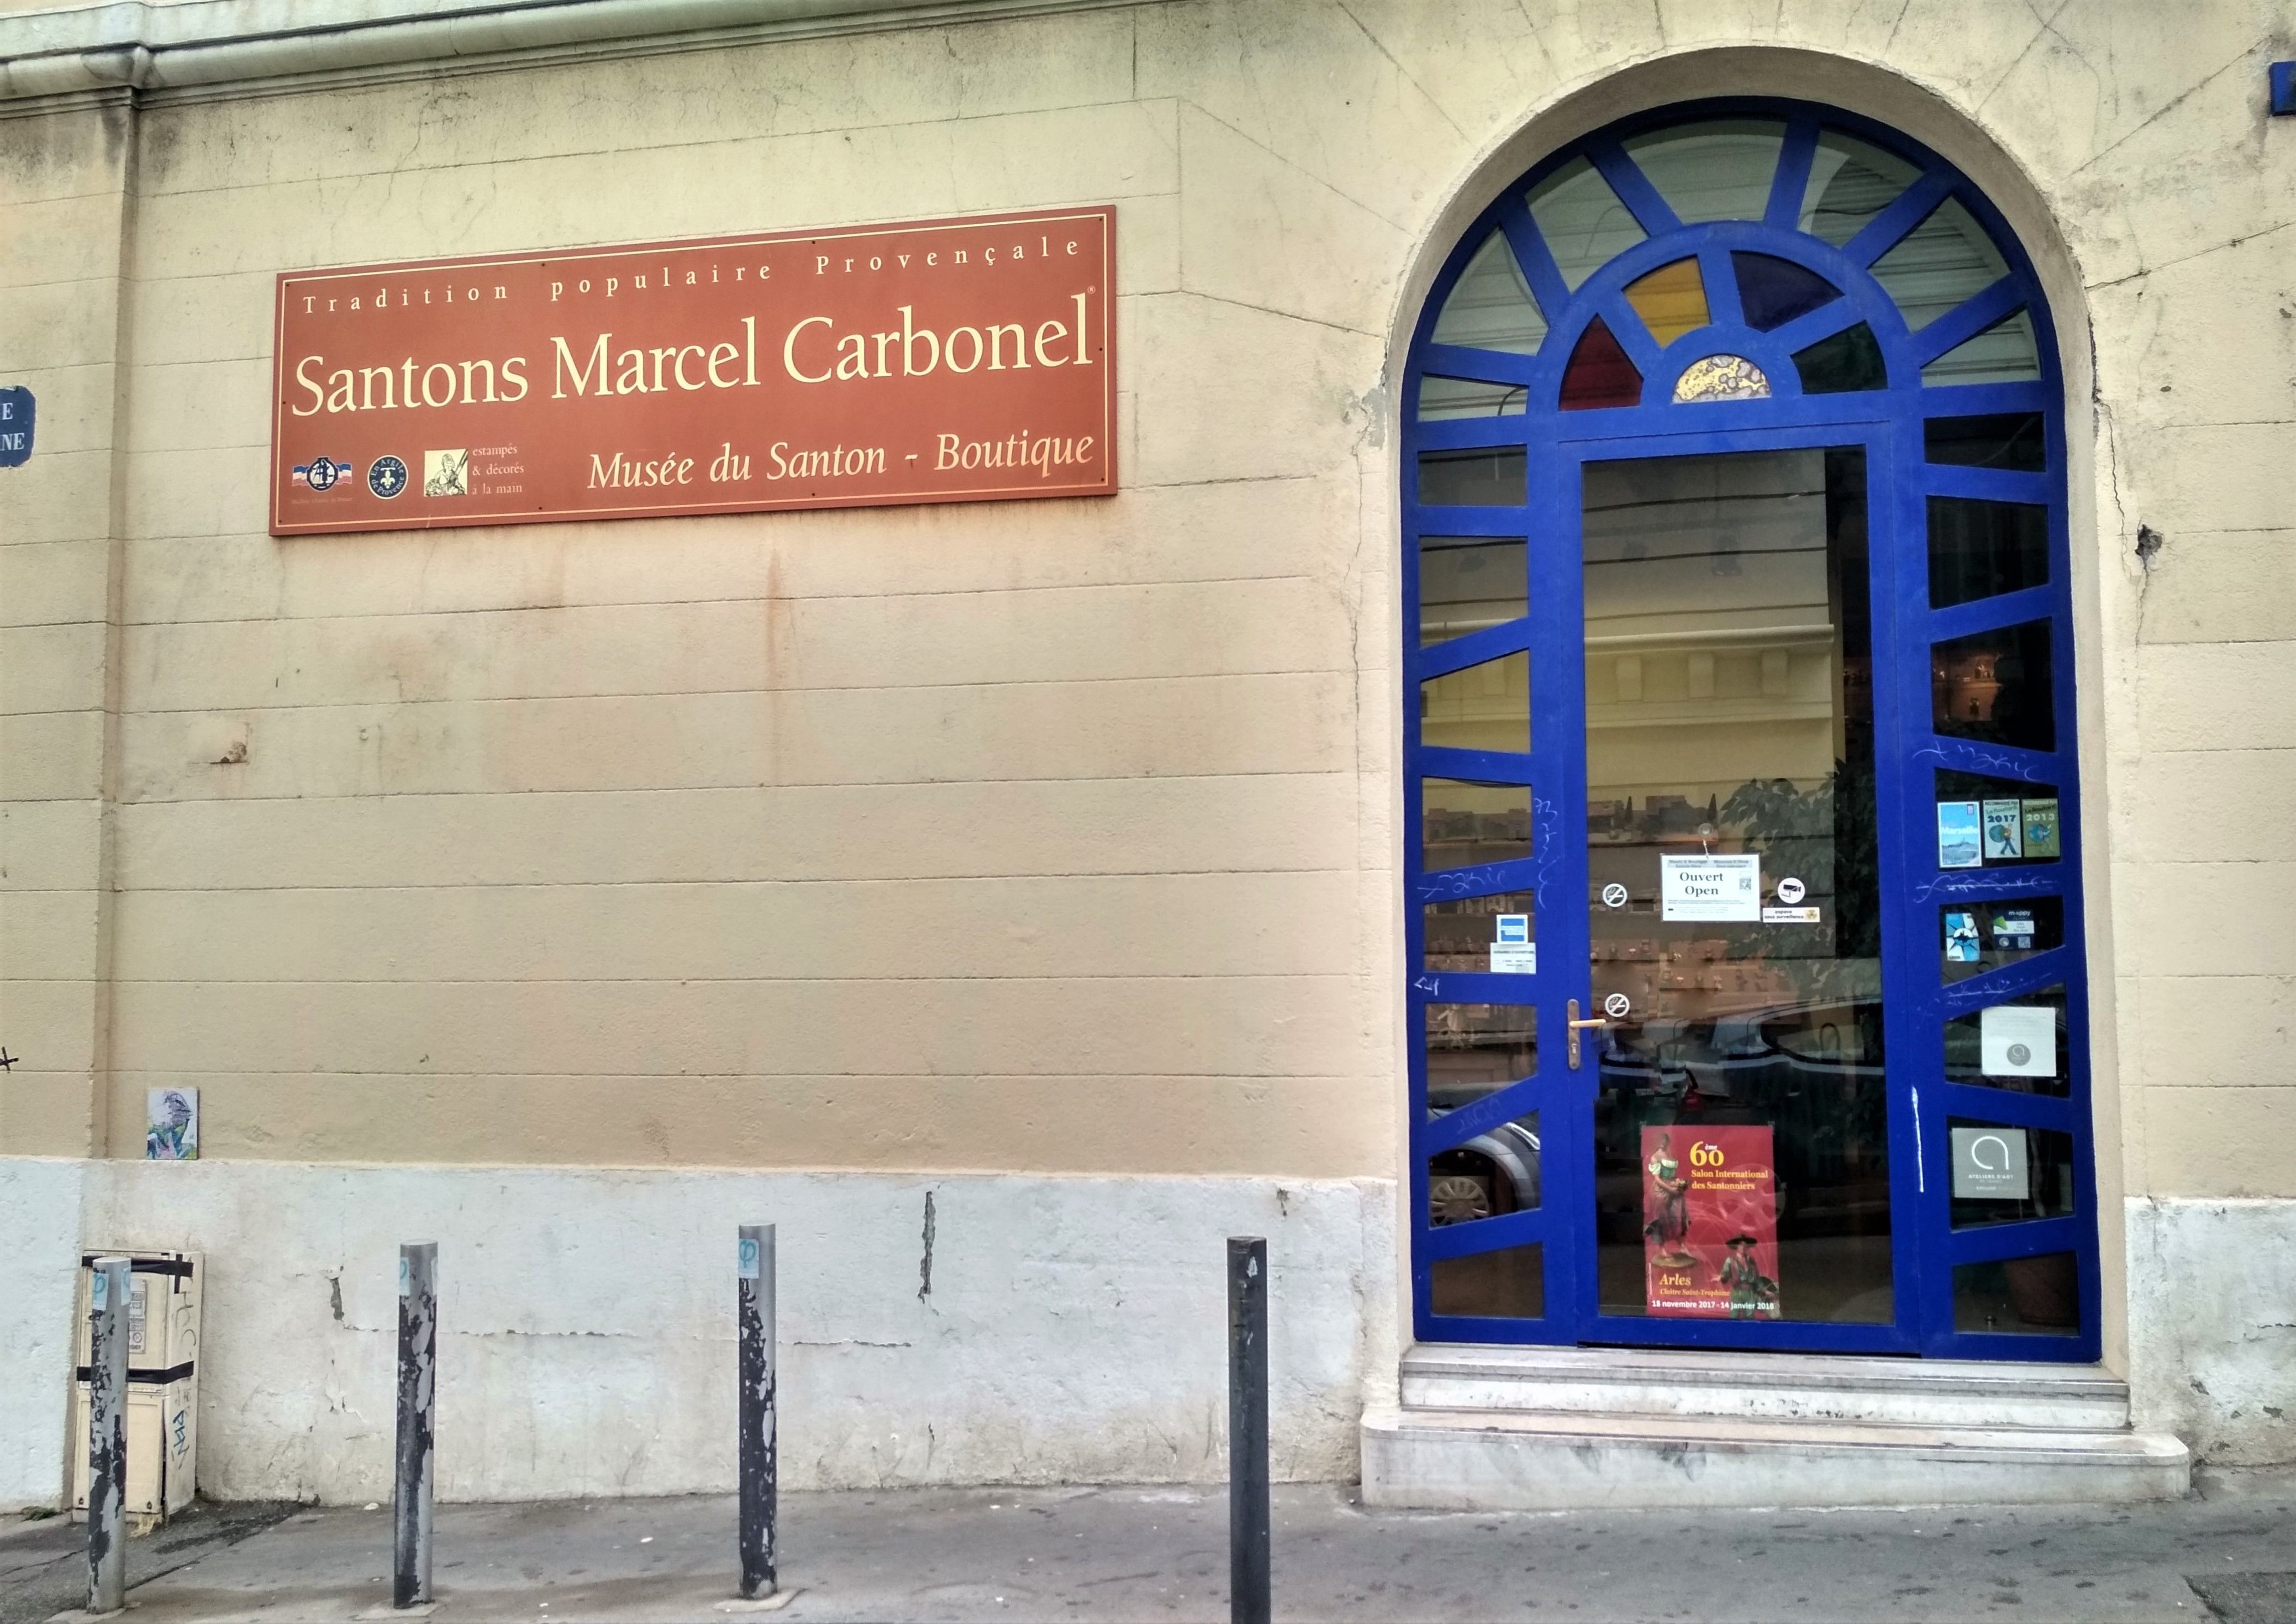 Santons Marcel Carbonel, Boutique and museum, Marseille: All Year